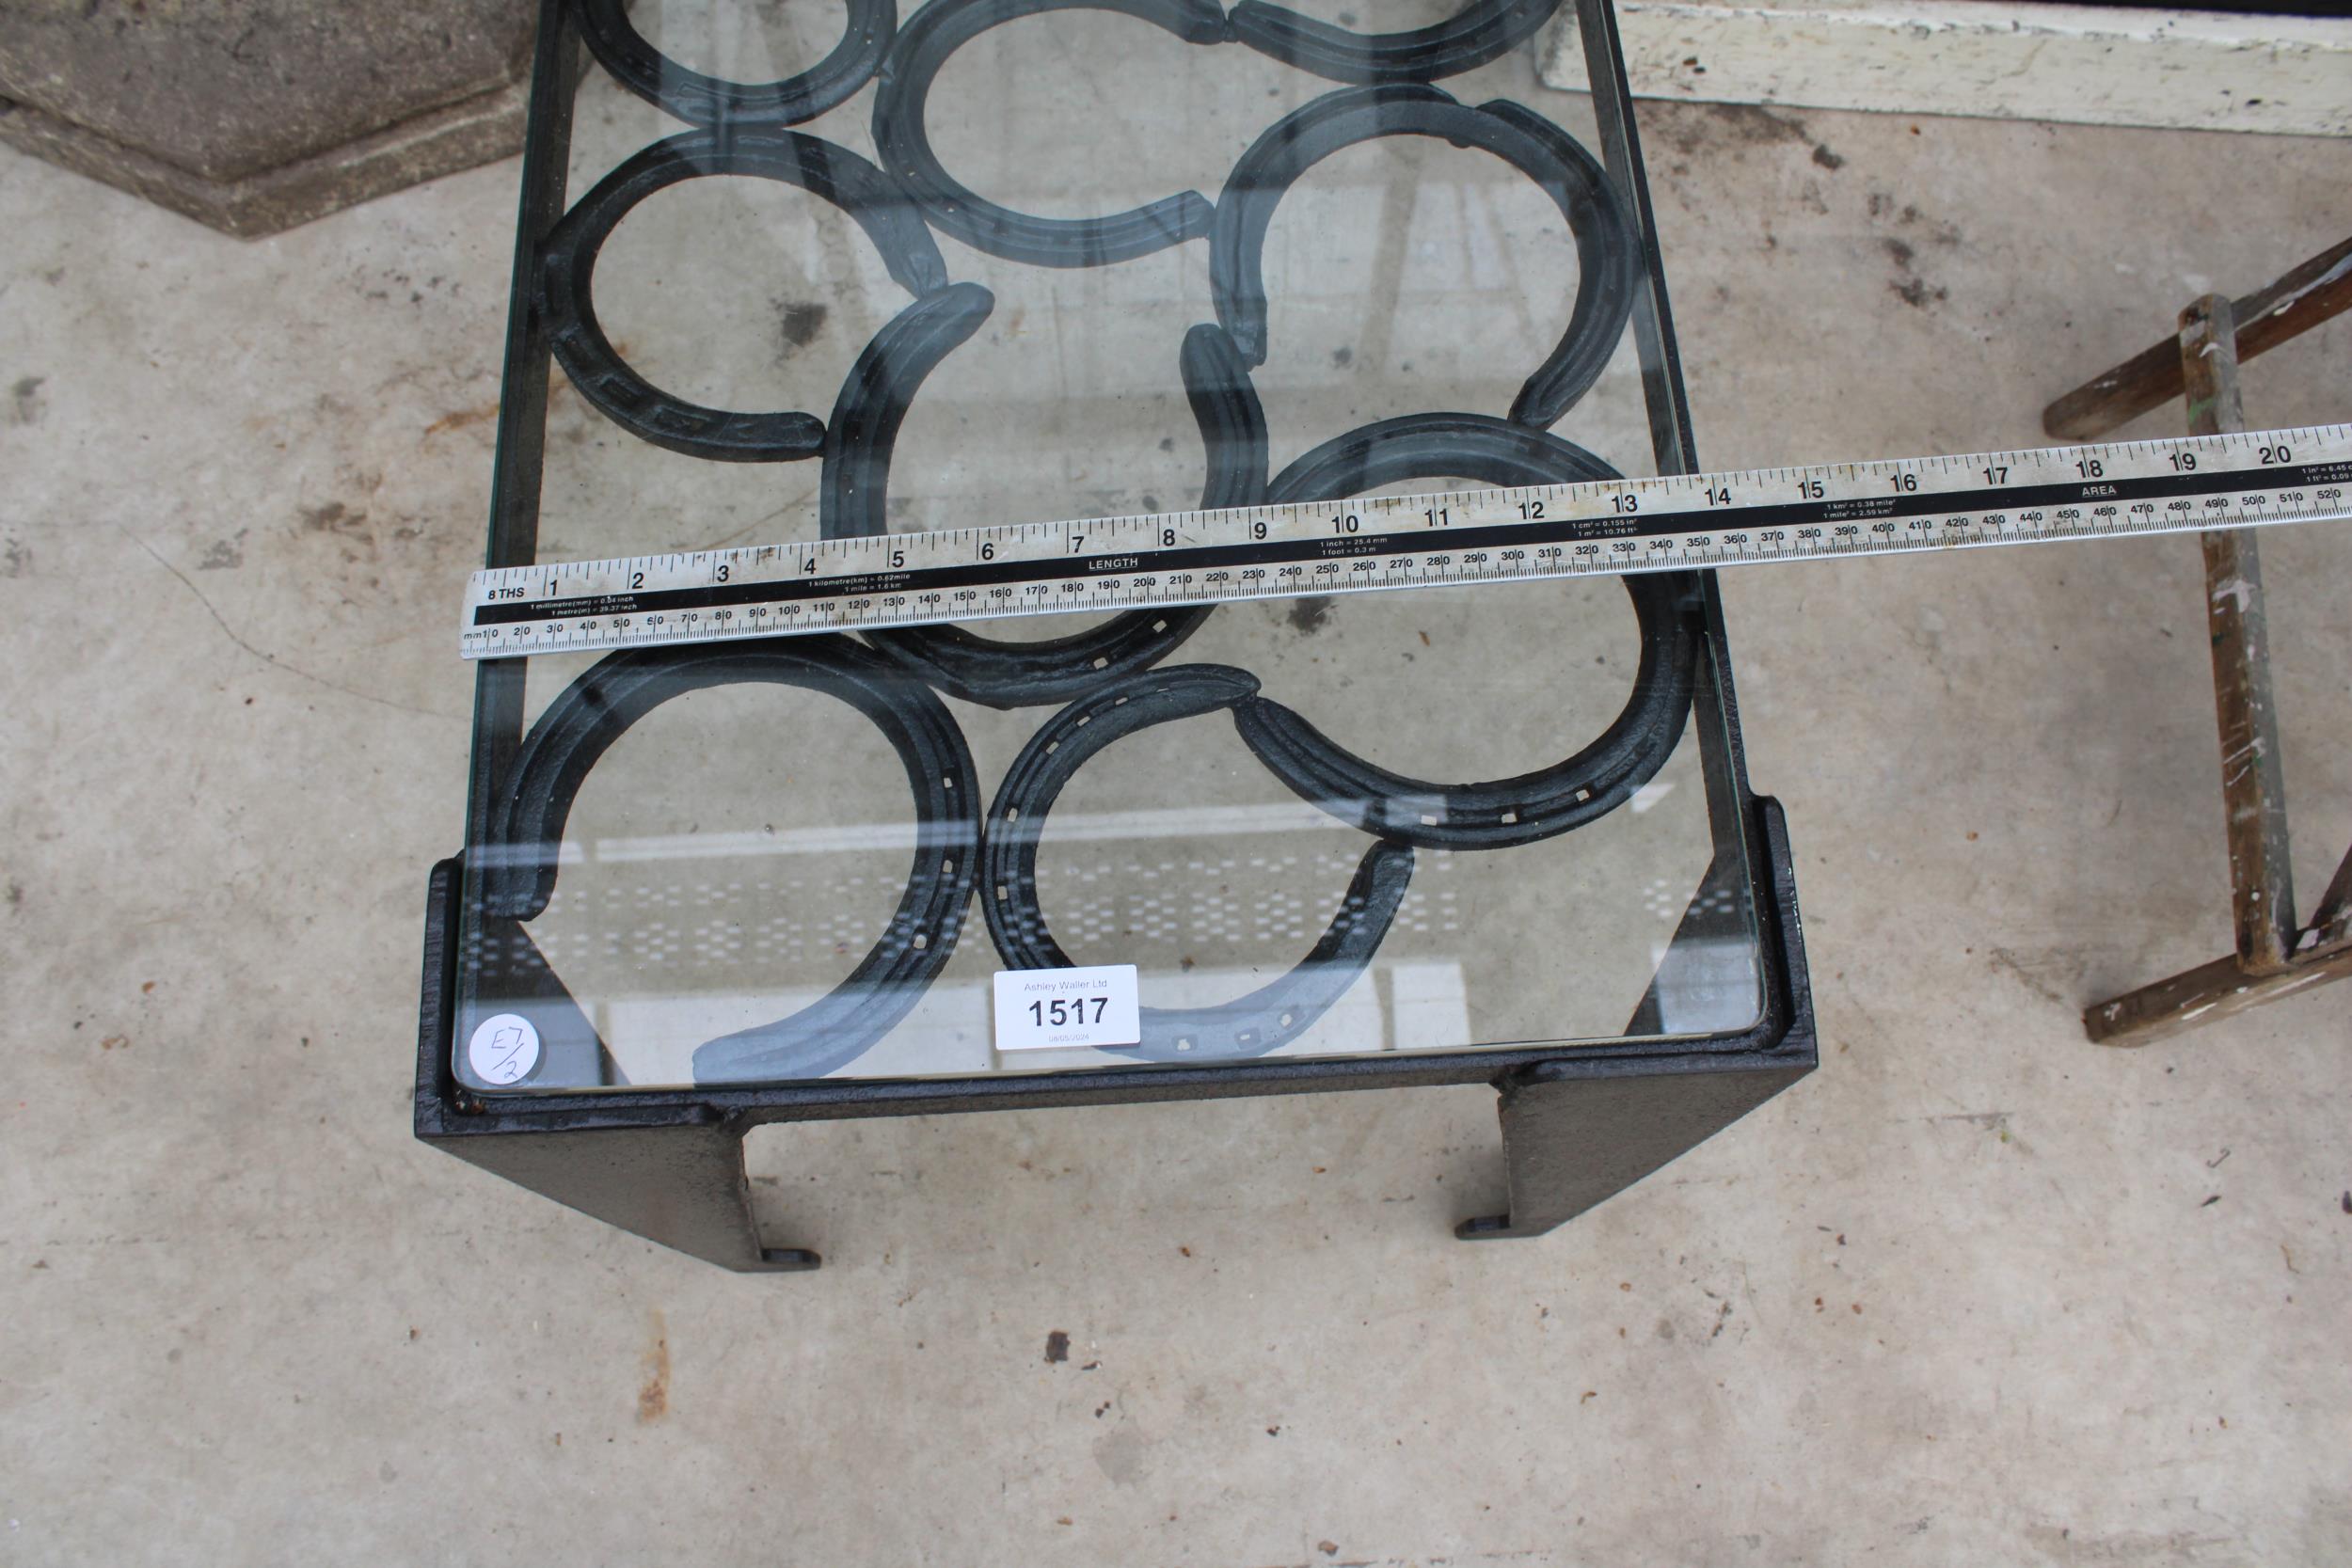 A VINTAGE STYLE METAL COFFEE TABLE WITH GLASS TOP AND FORMED FROM HORSE SHOES - Image 4 of 4